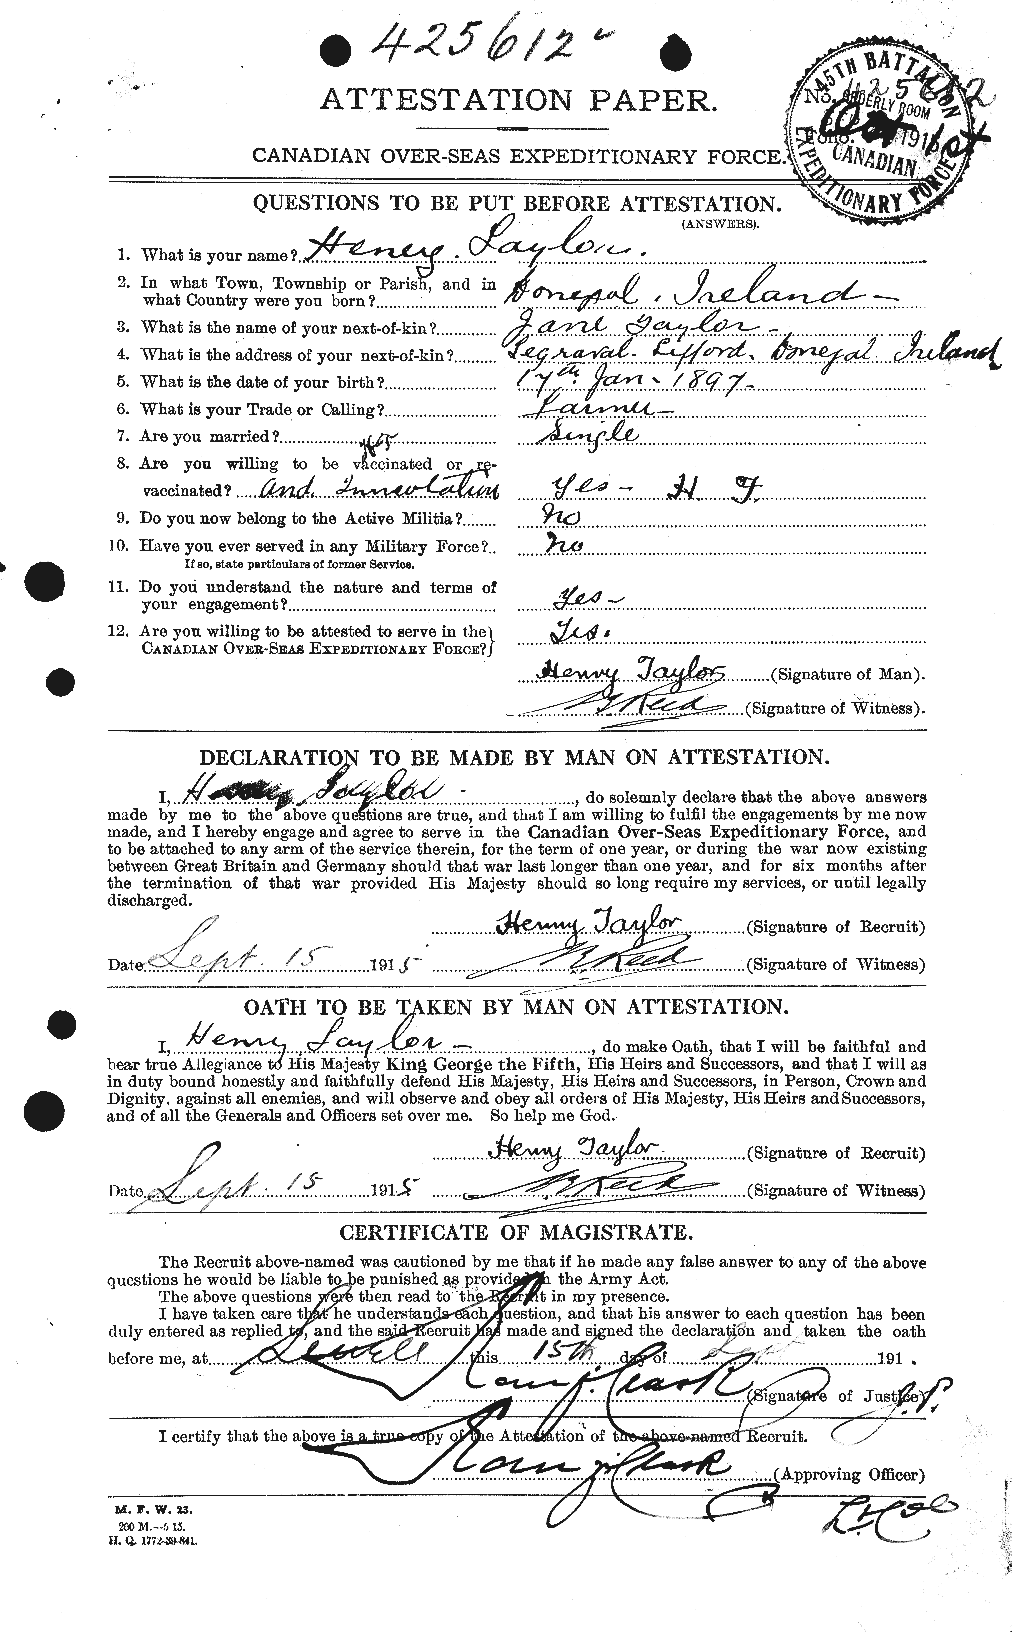 Personnel Records of the First World War - CEF 626523a